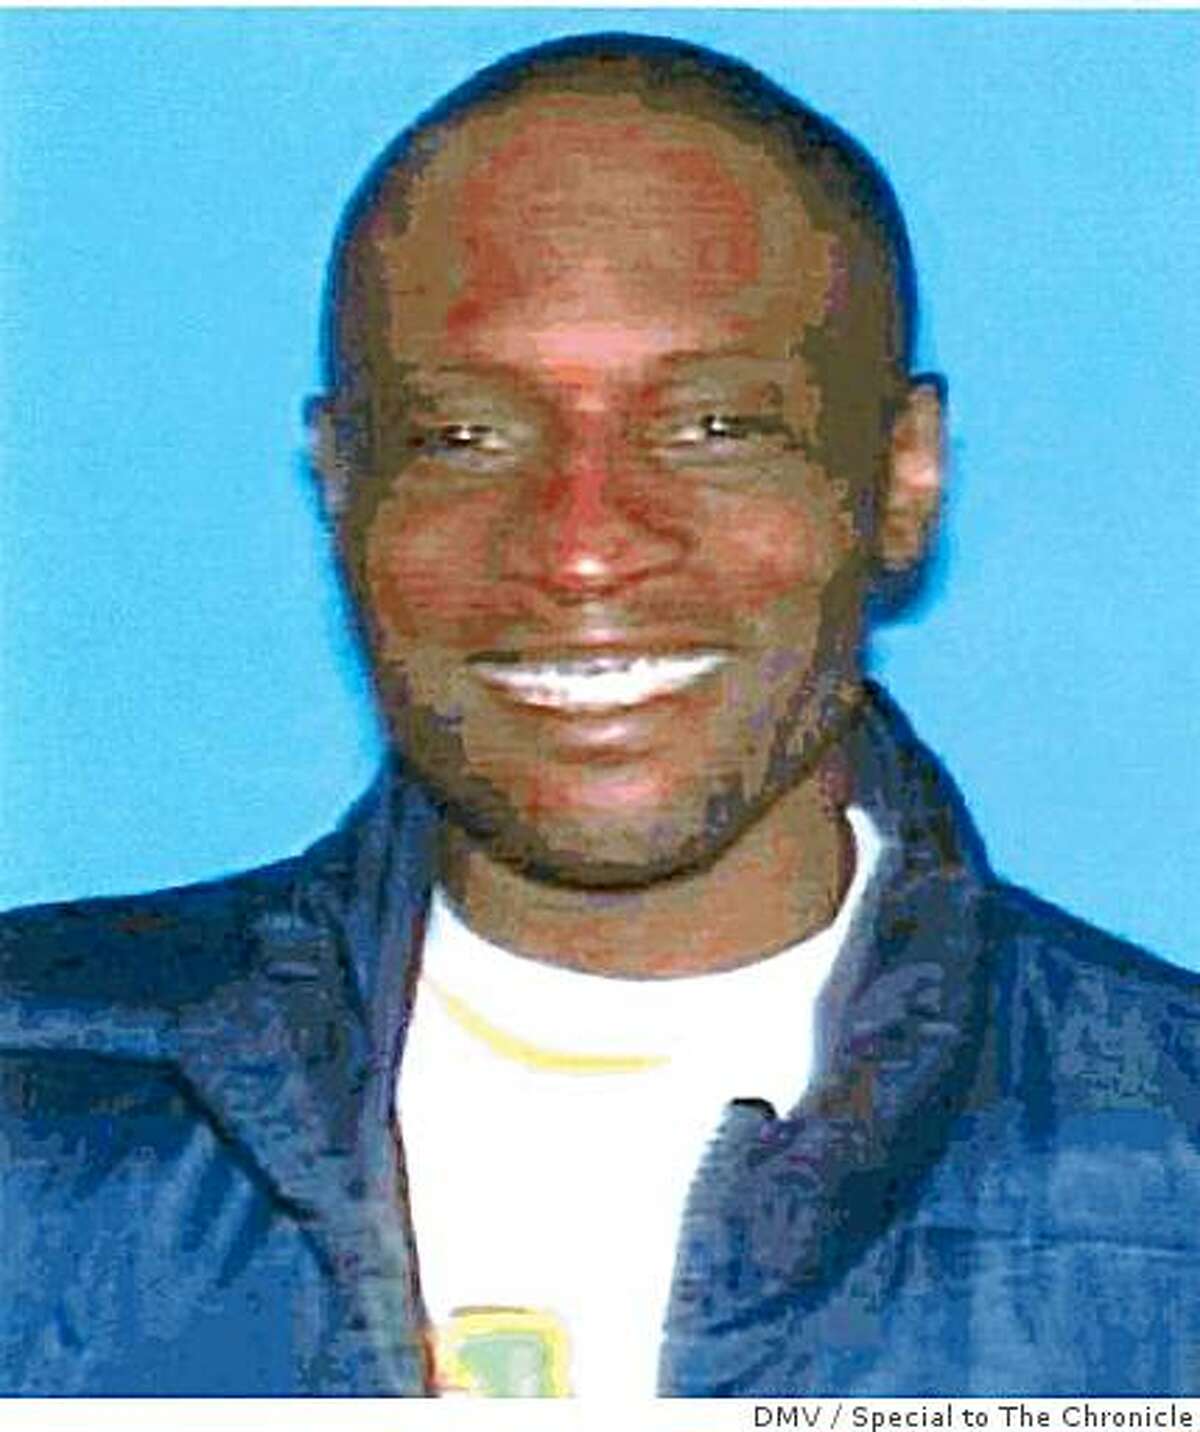 40-year-old Myron Edwards was killed Saturday, Feb. 7, 2009 in San Francisco, Calif. All the recovering addict wanted was his dog back. After he went to SF Housing Authority officials to complain that someone had stolen it during a burglary last week at the Plaza East project in the Western Addition, someone beat Edward up, and three days later he was shot to death.